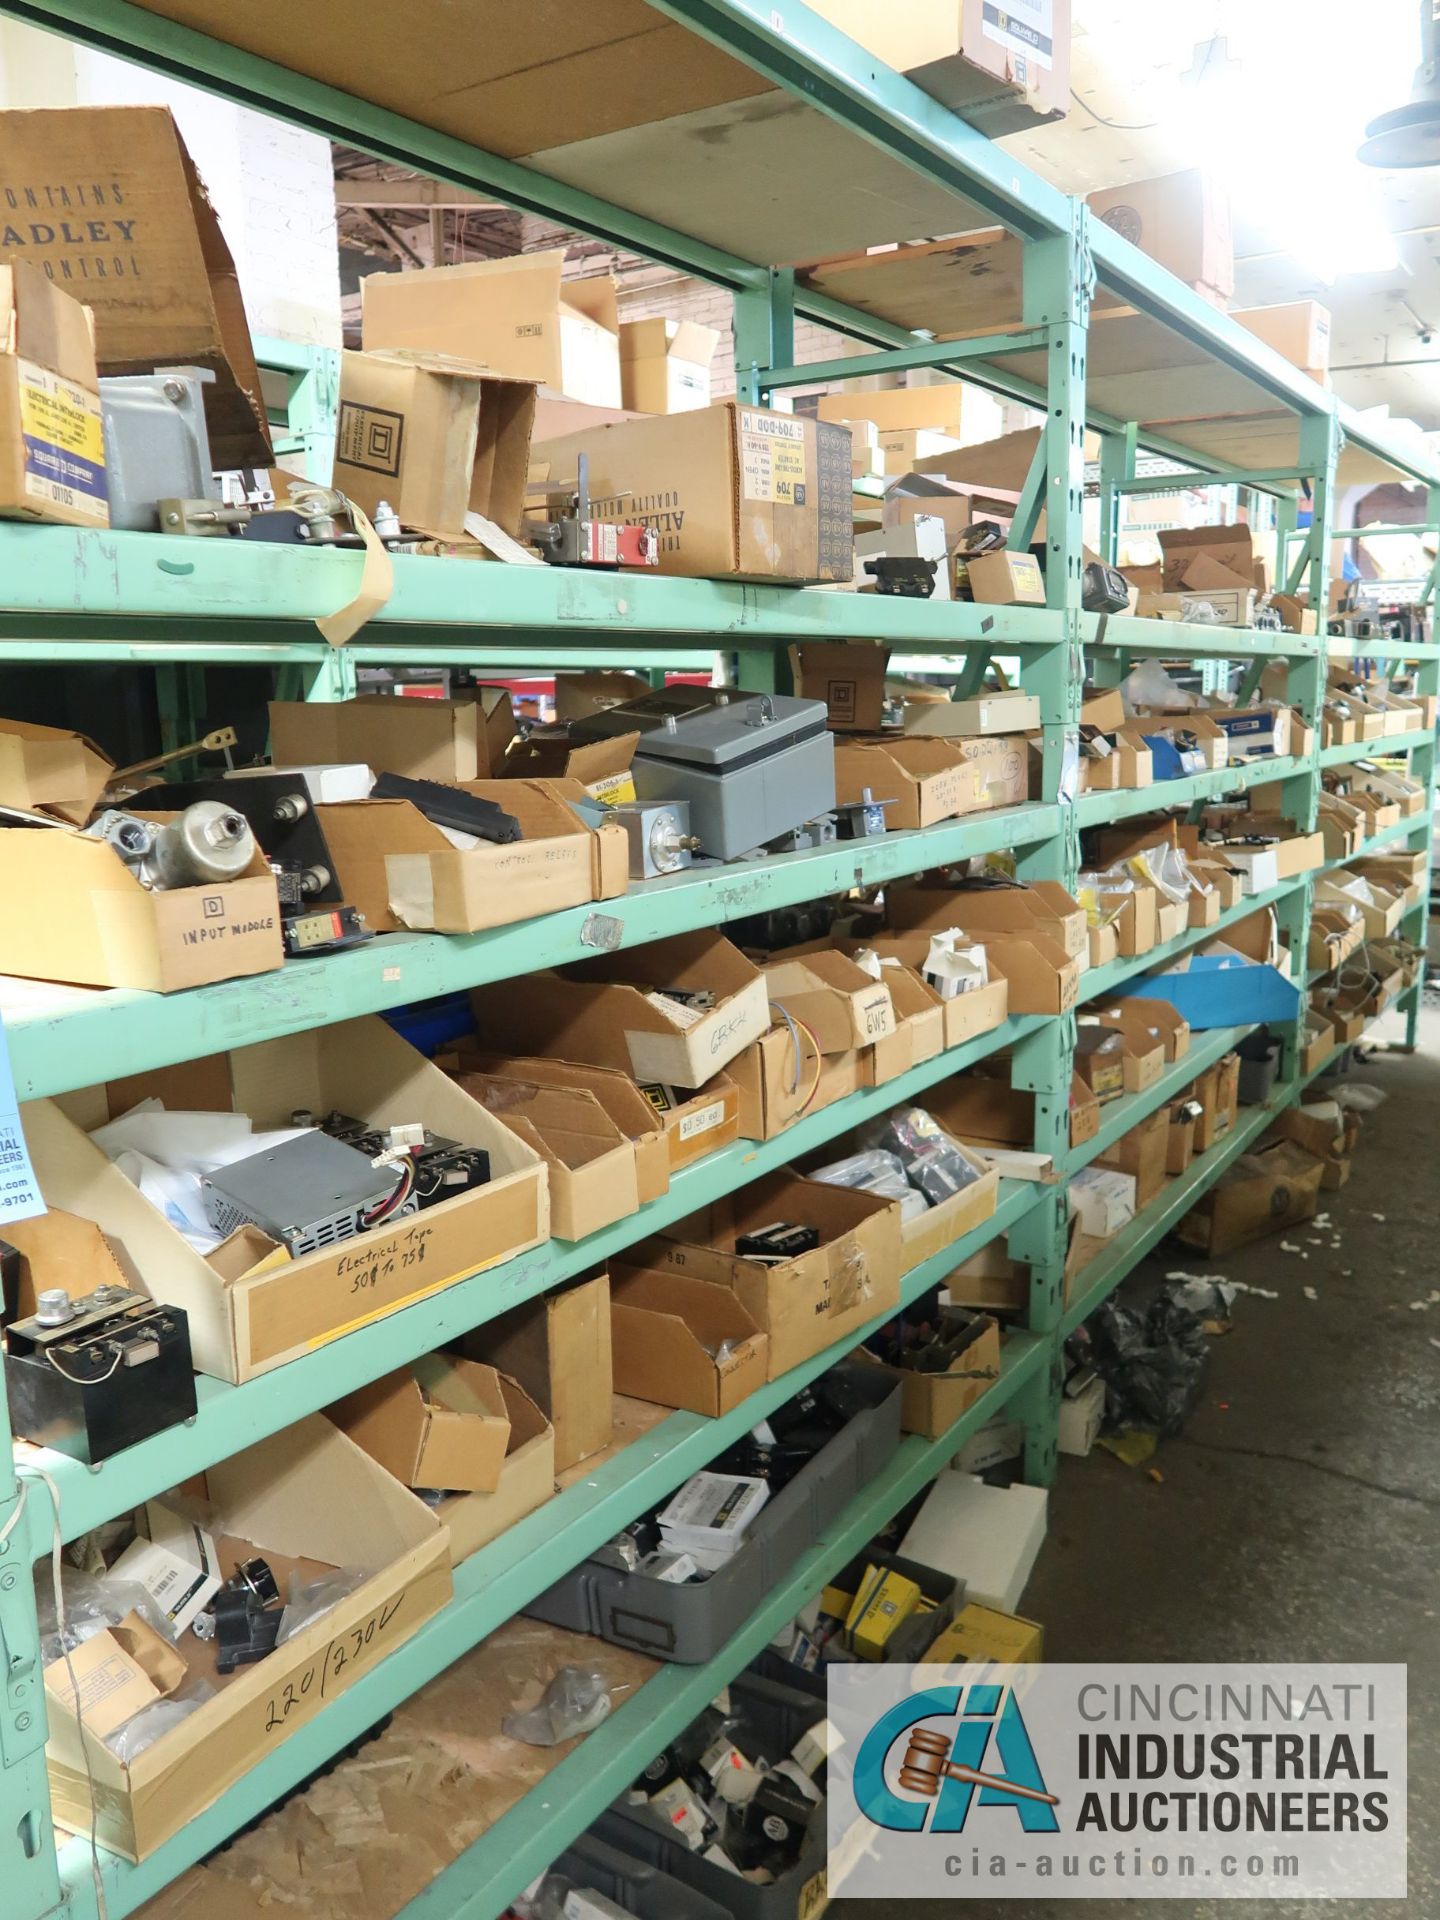 (LOT) CONTENTS OF (3) SECTION GREEN RACK - ALLEN BRADLEY ELECTRICAL COMPONENTS, INDUSTRIAL